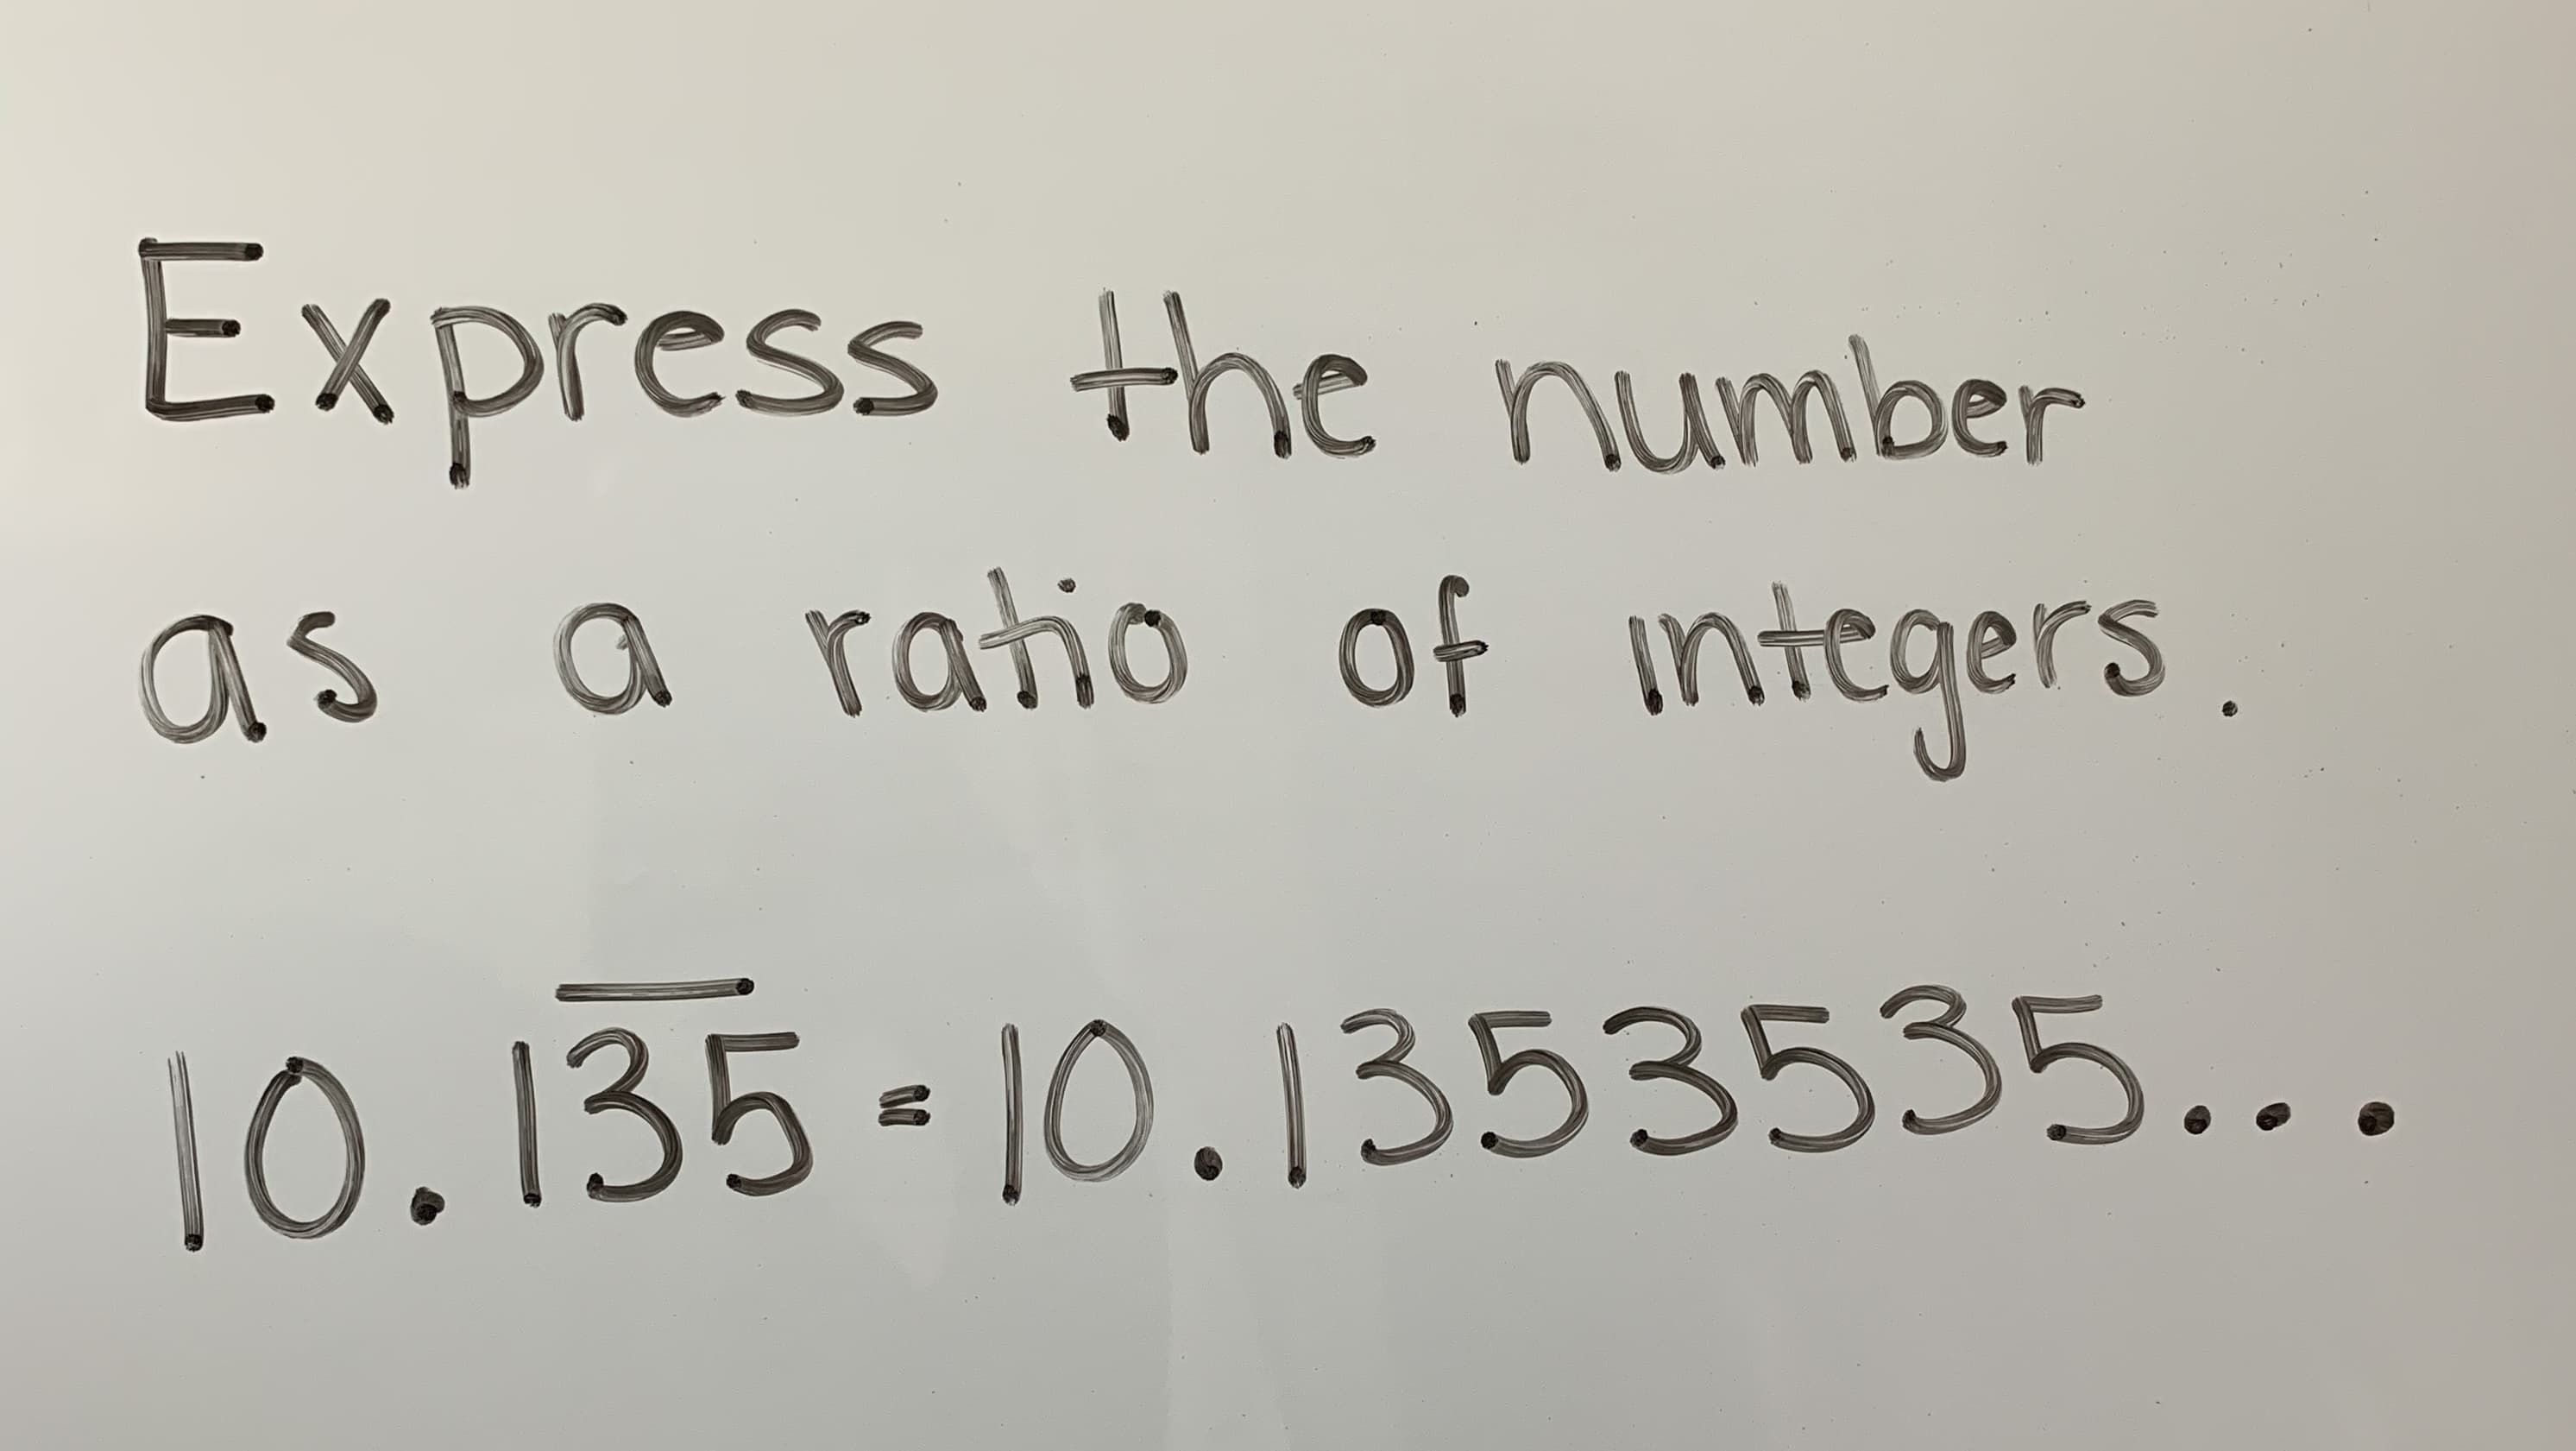 Express +he number
as a raho of integers
0.135 10.1353535
